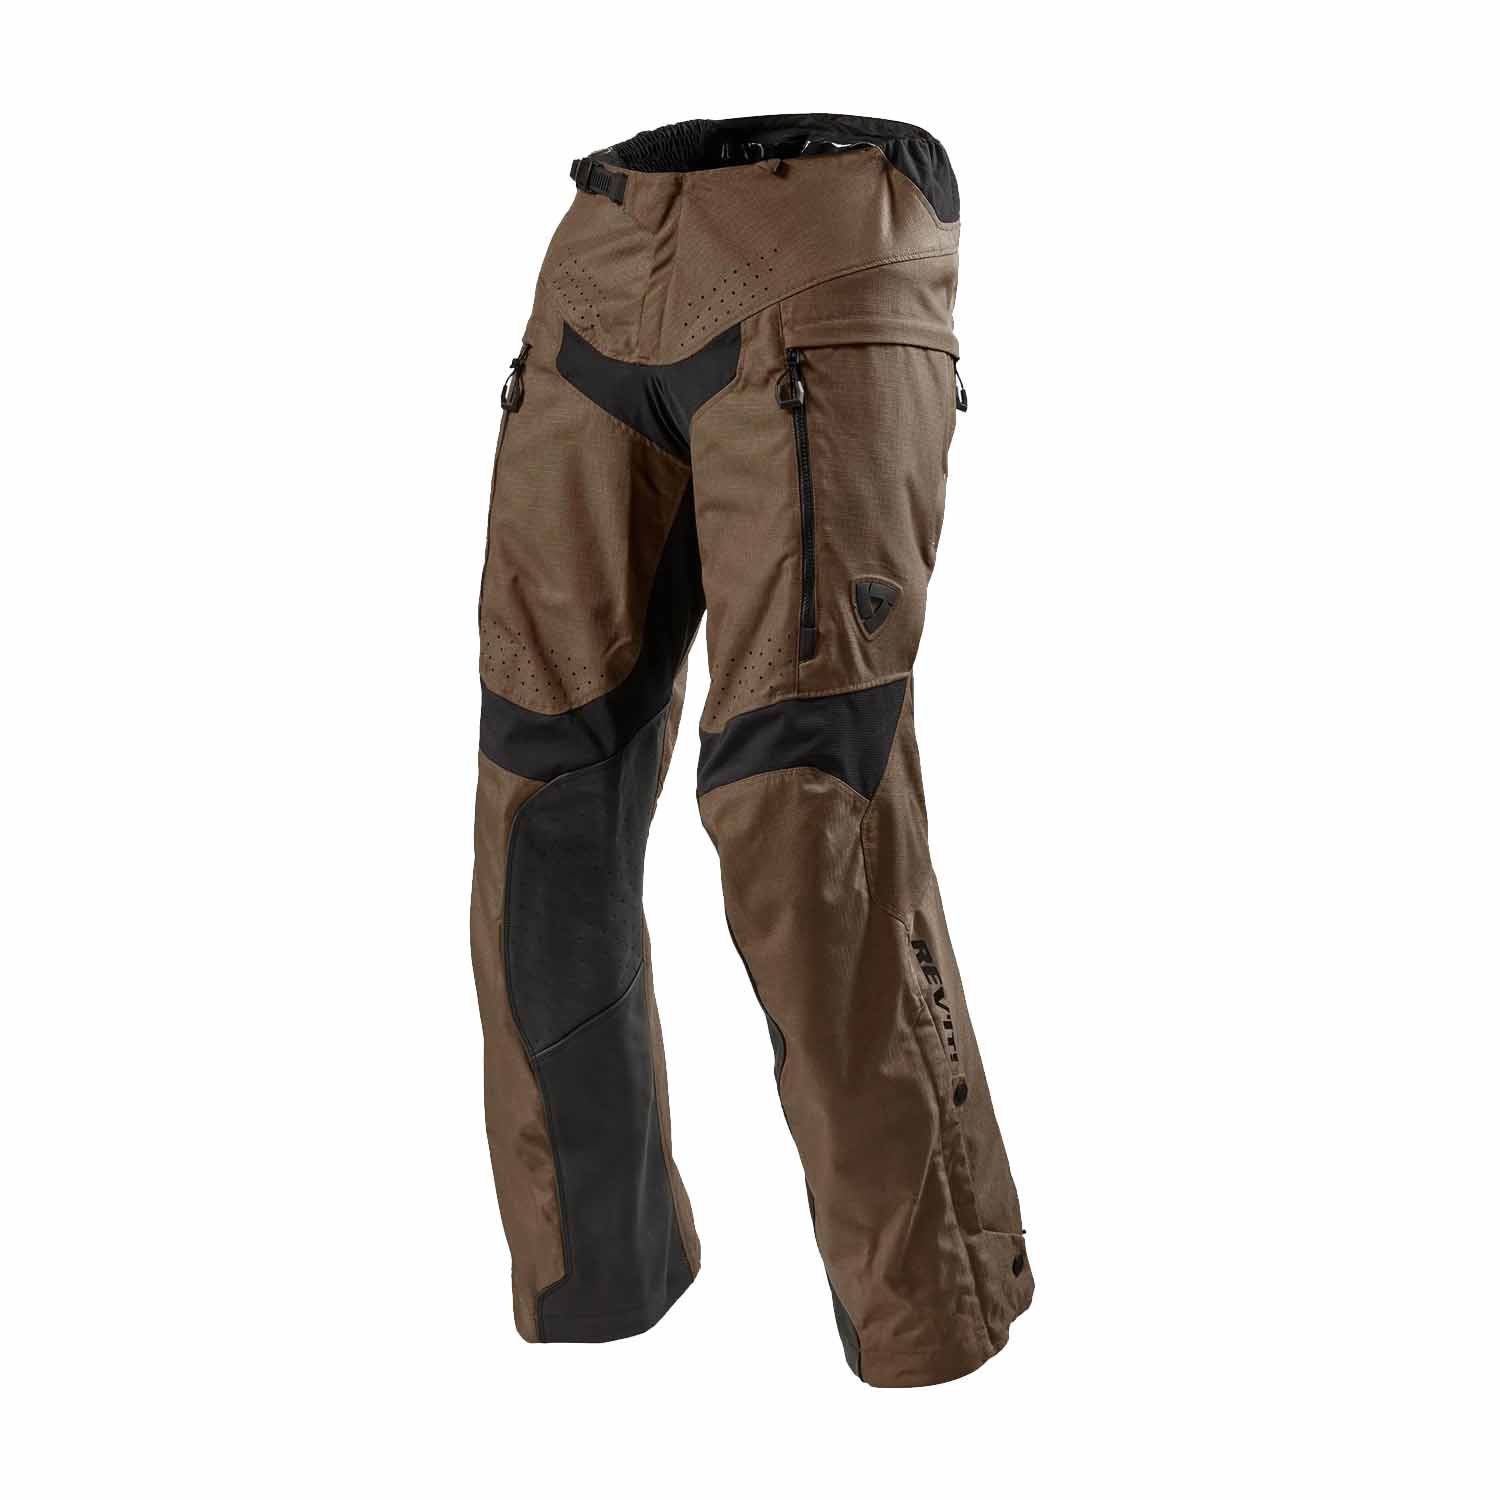 Image of REV'IT! Continent Pants Brown Standard Motorcycle Pants Talla S